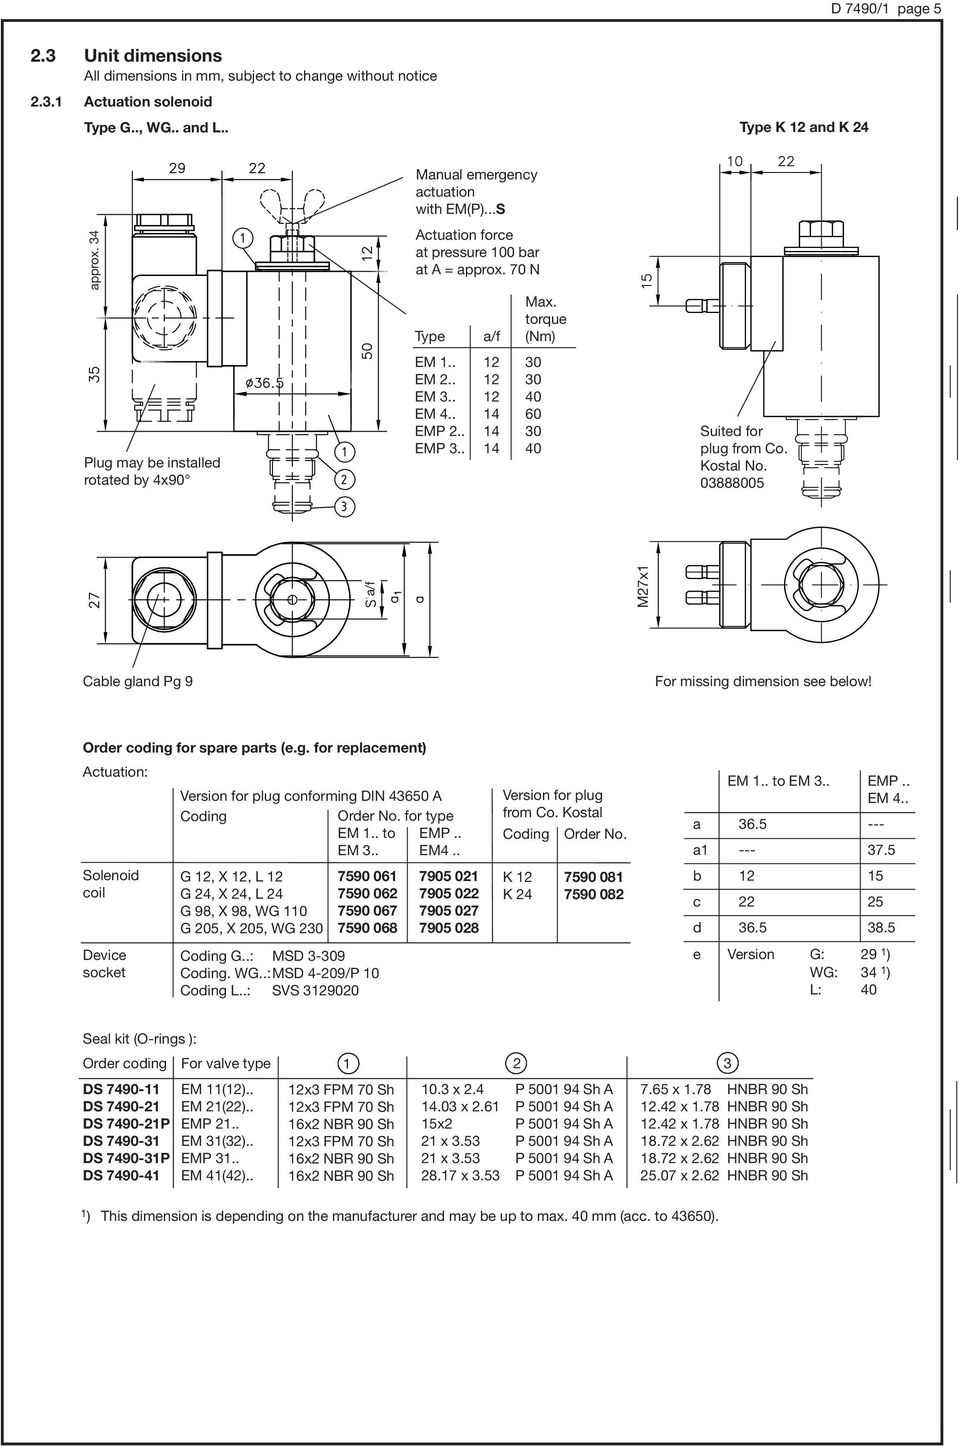 . EMP.. Suited for plug from Co. Kostal No. 08805 M27x1 Cable gland Pg 9 For missing dimension see below! Order coding for spare parts (e.g. for replacement) Actuation: Solenoid coil Device socket Version for plug conforming DIN 46 A Coding Order No.